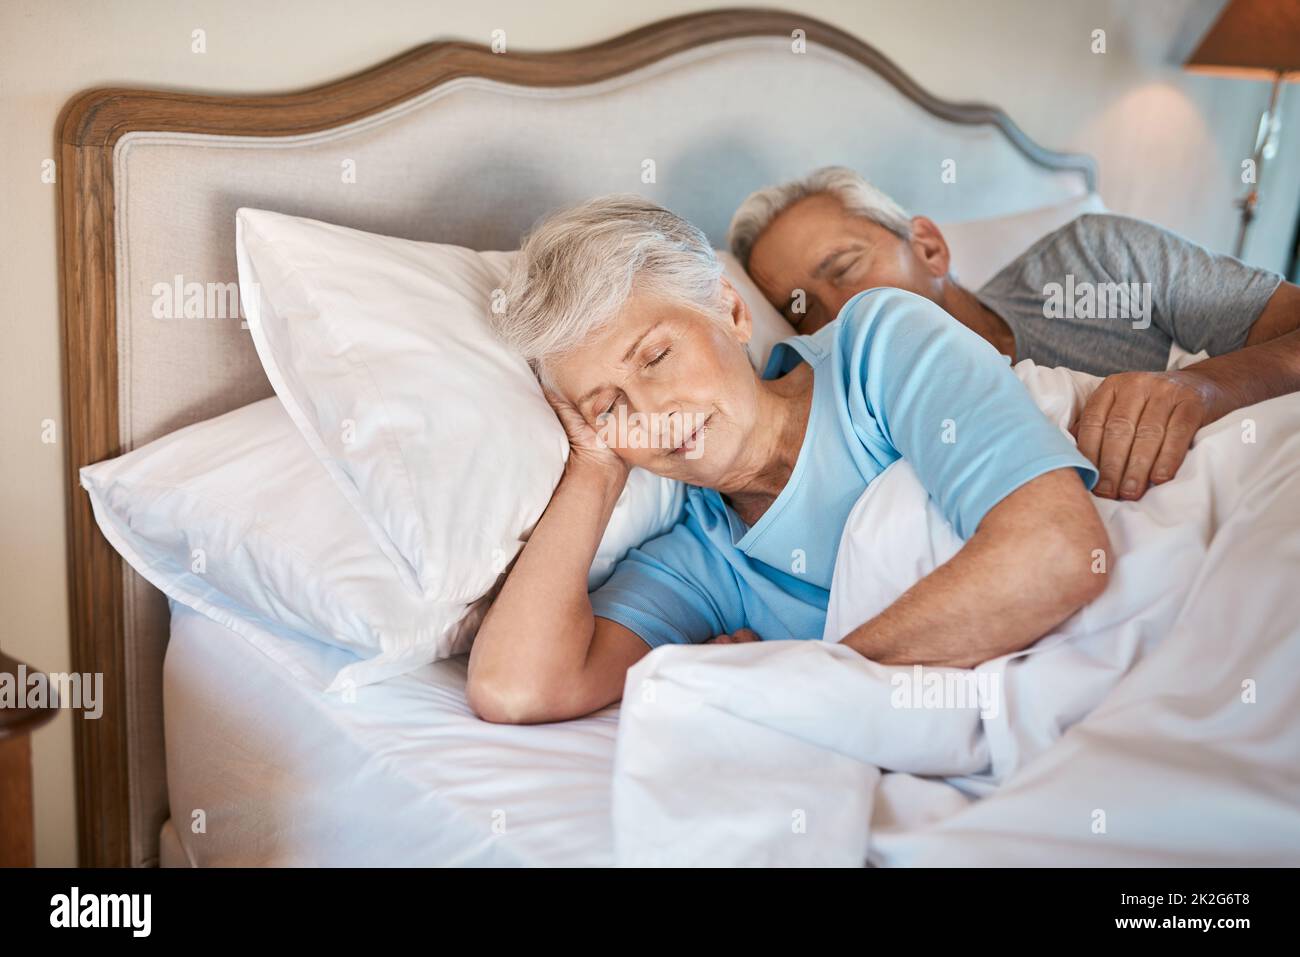 Old habits never die. Cropped shot of an affectionate senior couple cuddling each other while asleep in bed at a nursing home. Stock Photo